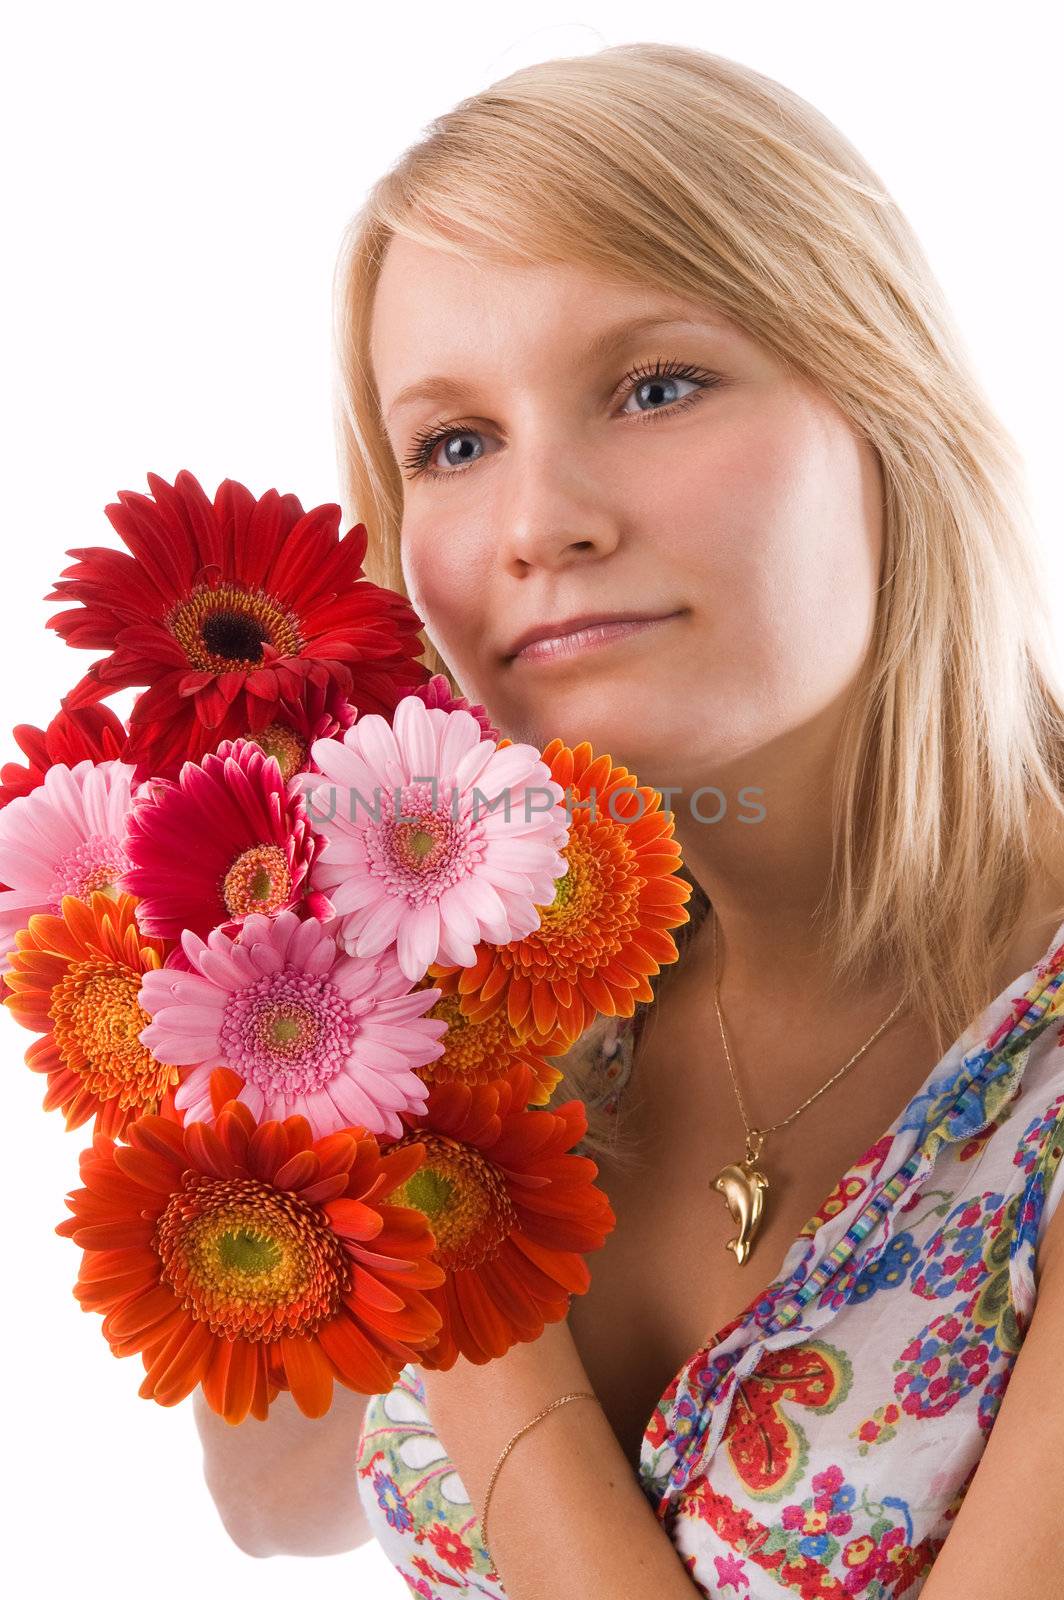 The beautiful blonde holds flowers in hands